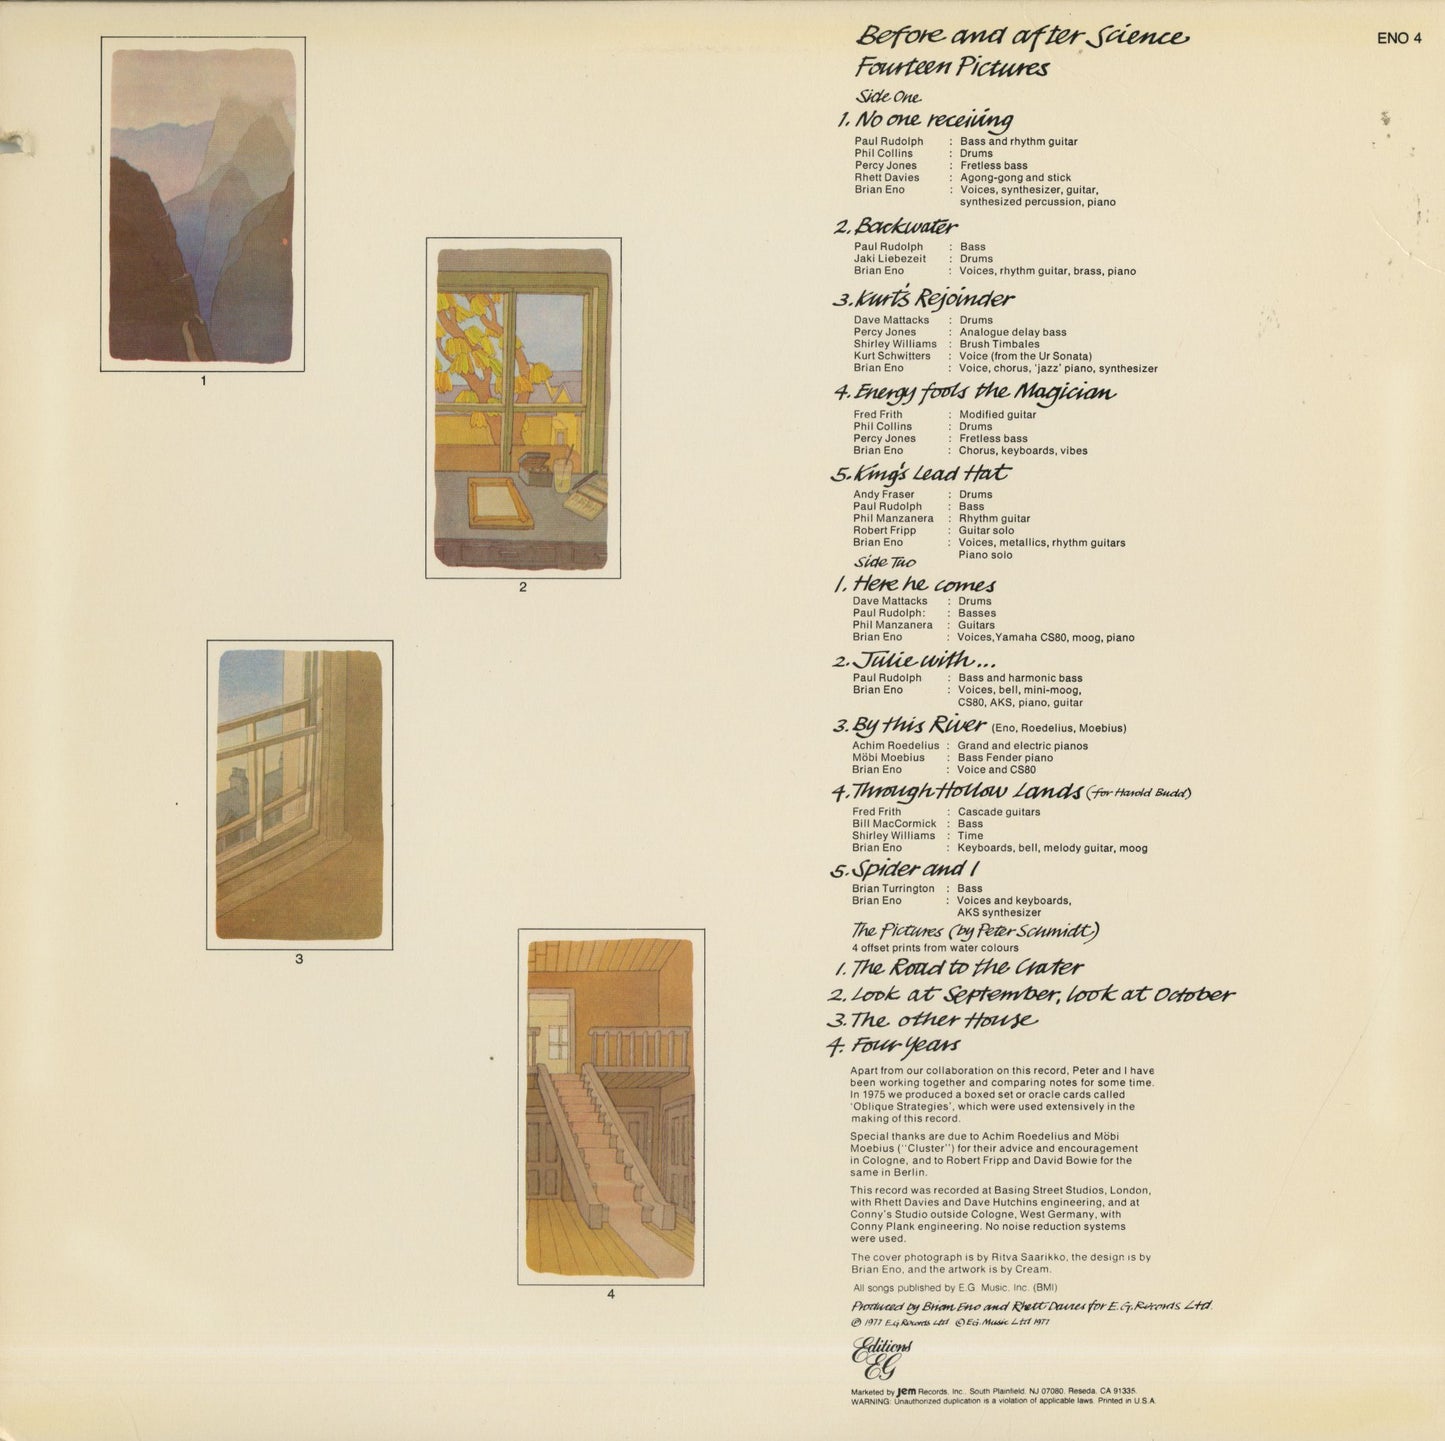 Brian Eno / ブライアン・イーノ / Before And After Science (ILPS 9478)